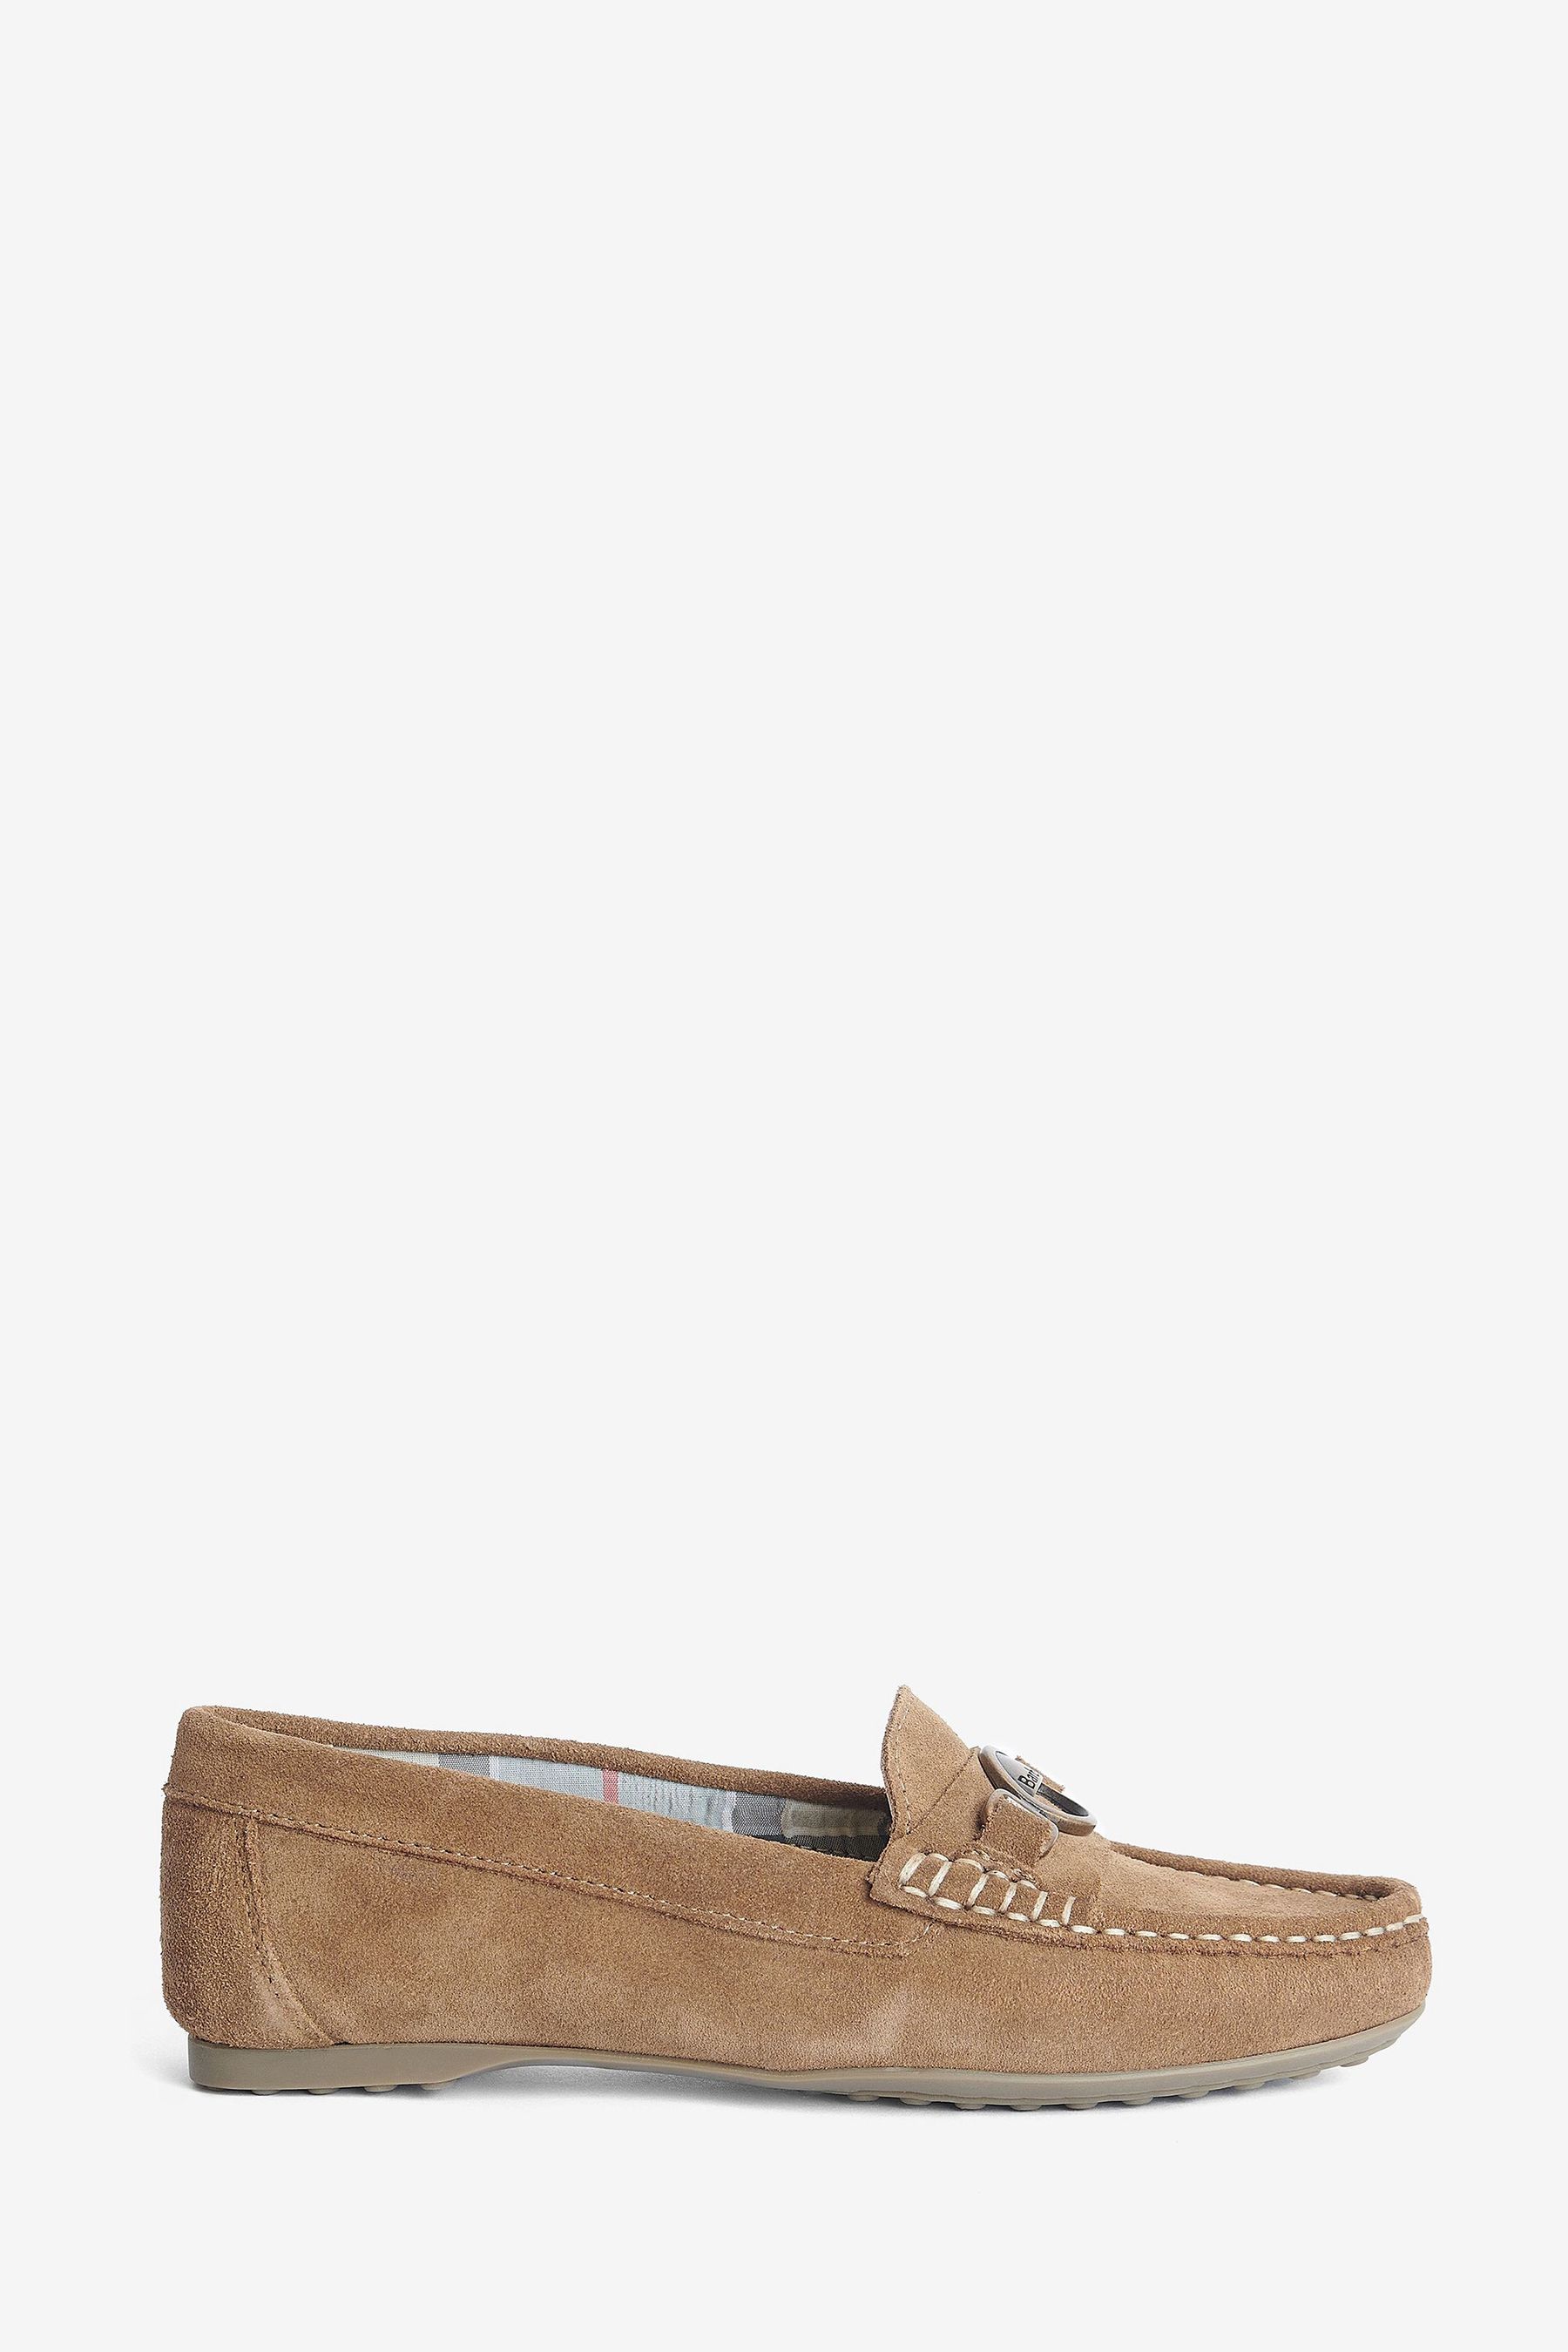 Buy Barbour® Tan Brown Anika Suede Loafers from the Next UK online shop